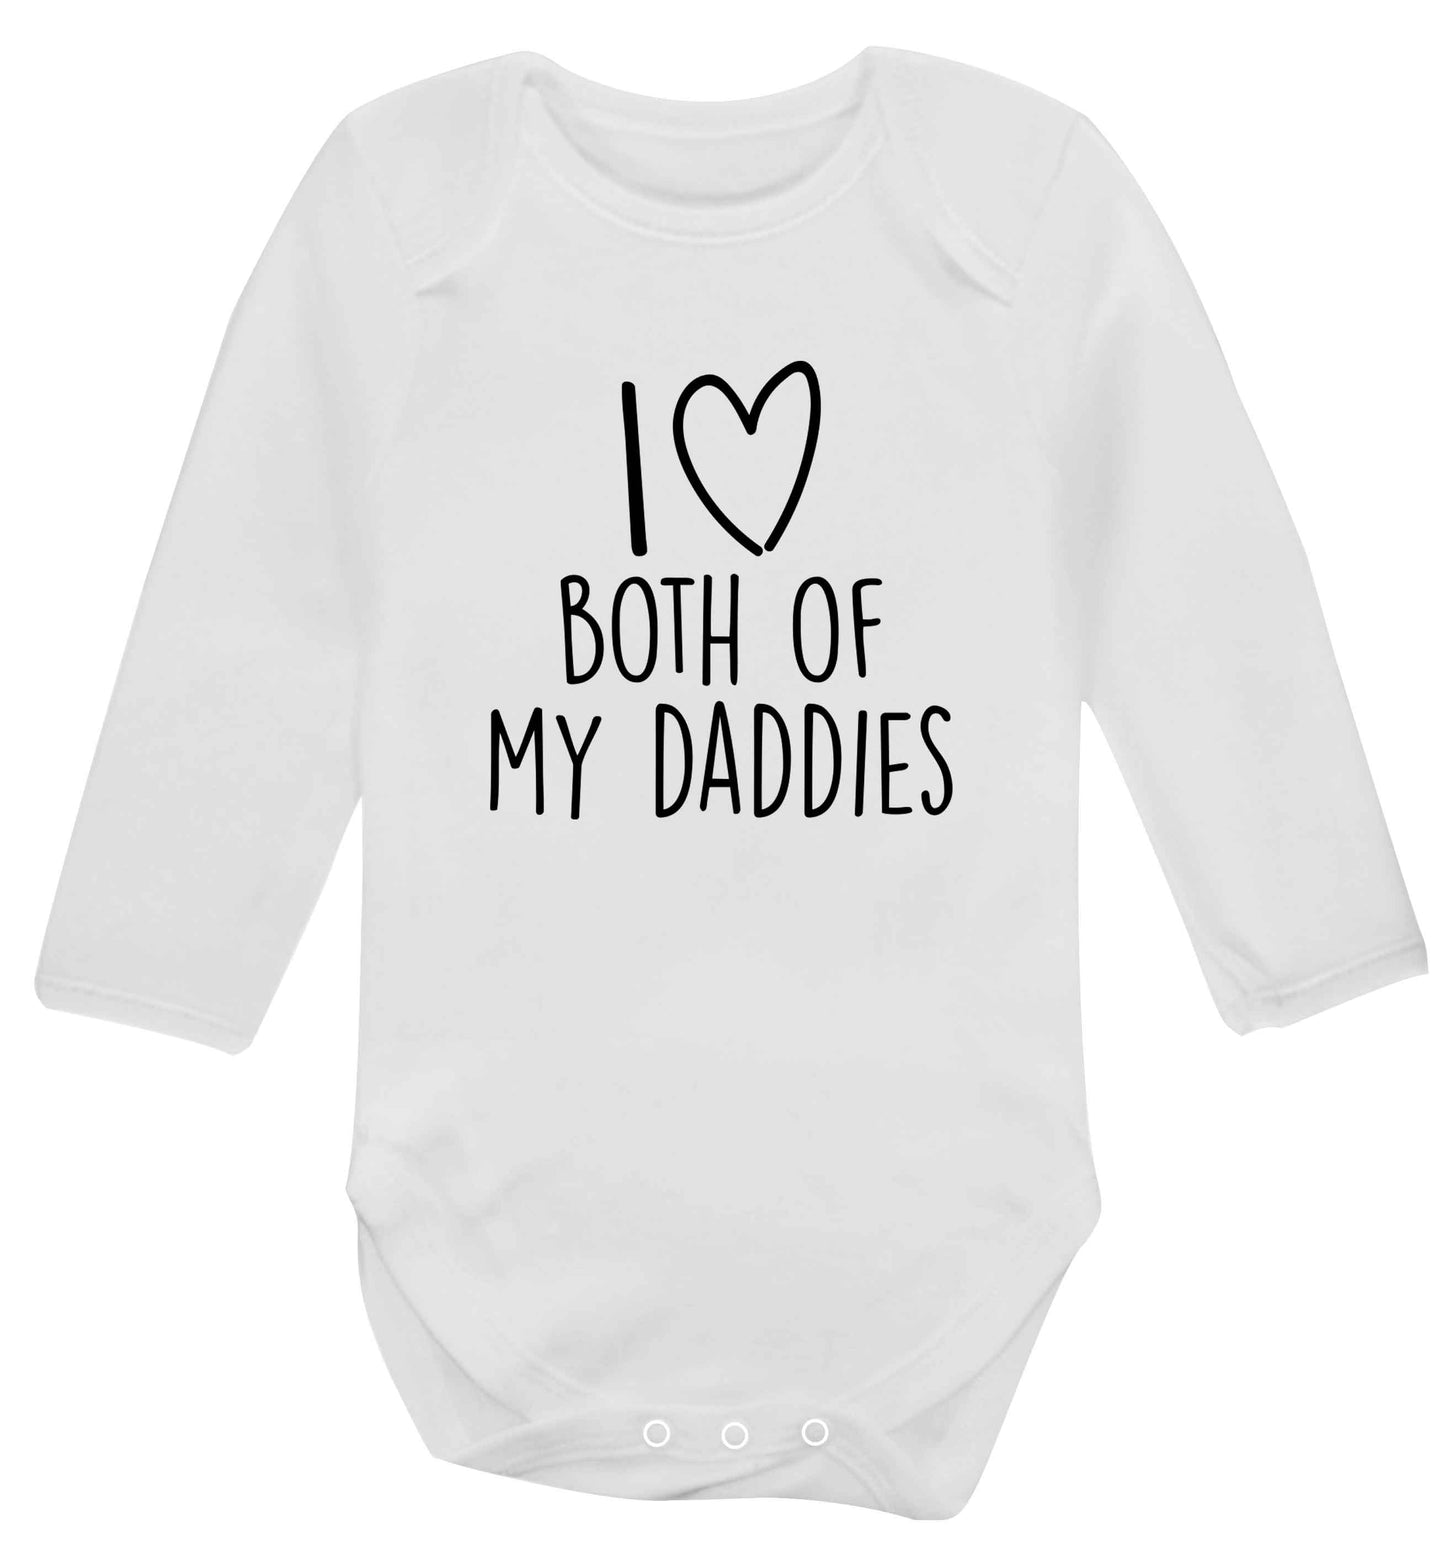 I love both of my daddies baby vest long sleeved white 6-12 months